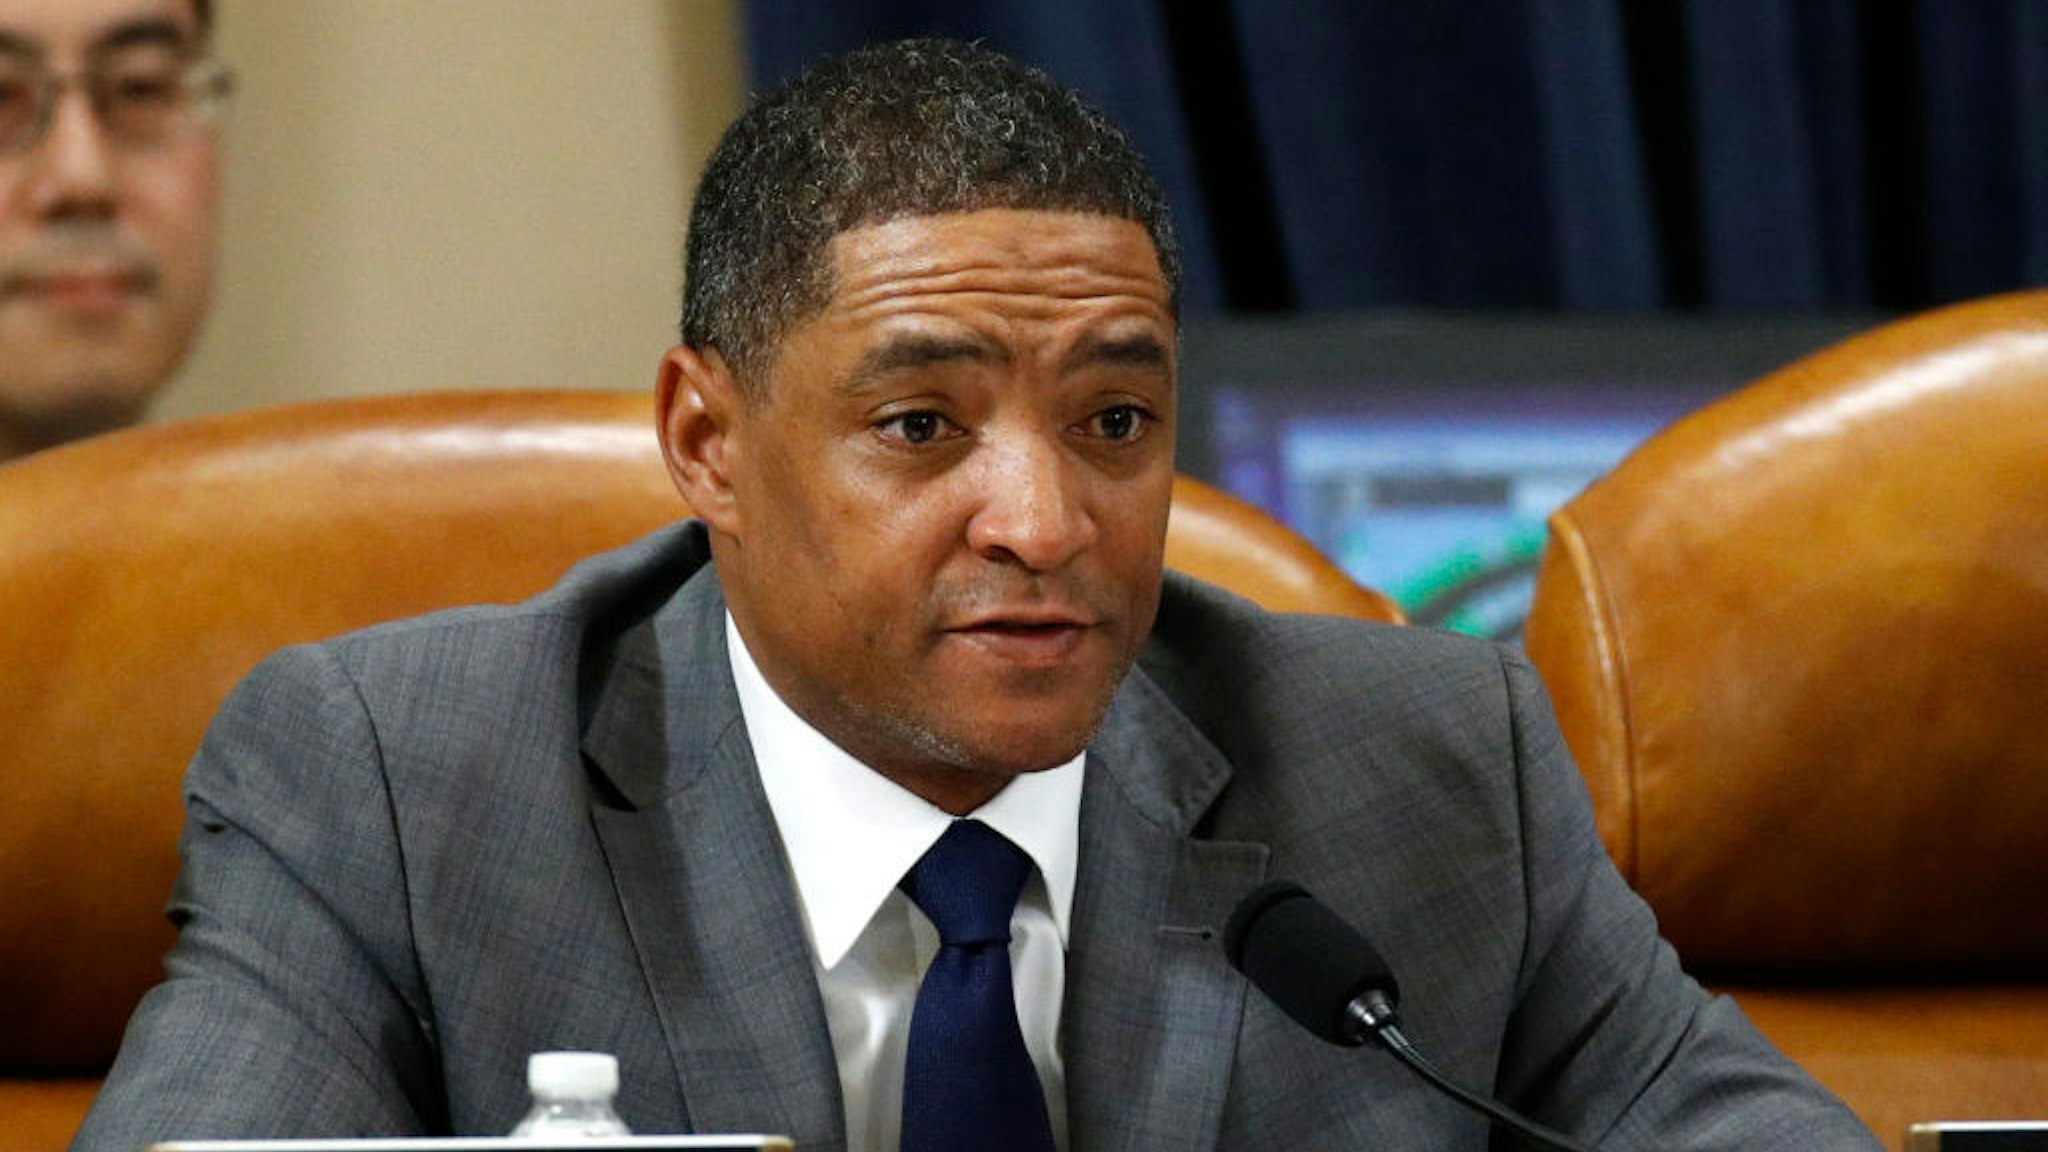 WASHINGTON, DC - DECEMBER 13: Rep. Cedric Richmond, D-La., votes to approve the second article of impeachment as the House Judiciary Committee holds a public hearing to vote on the two articles of impeachment against U.S. President Donald Trump in the Longworth House Office Building on Capitol Hill December 13, 2019 in Washington, DC. The articles charge Trump with abuse of power and obstruction of Congress. House Democrats claim that Trump posed a 'clear and present danger' to national security and the 2020 election based on his dealings with Ukraine. (Photo by Patrick Semansky-Pool/Getty Images)